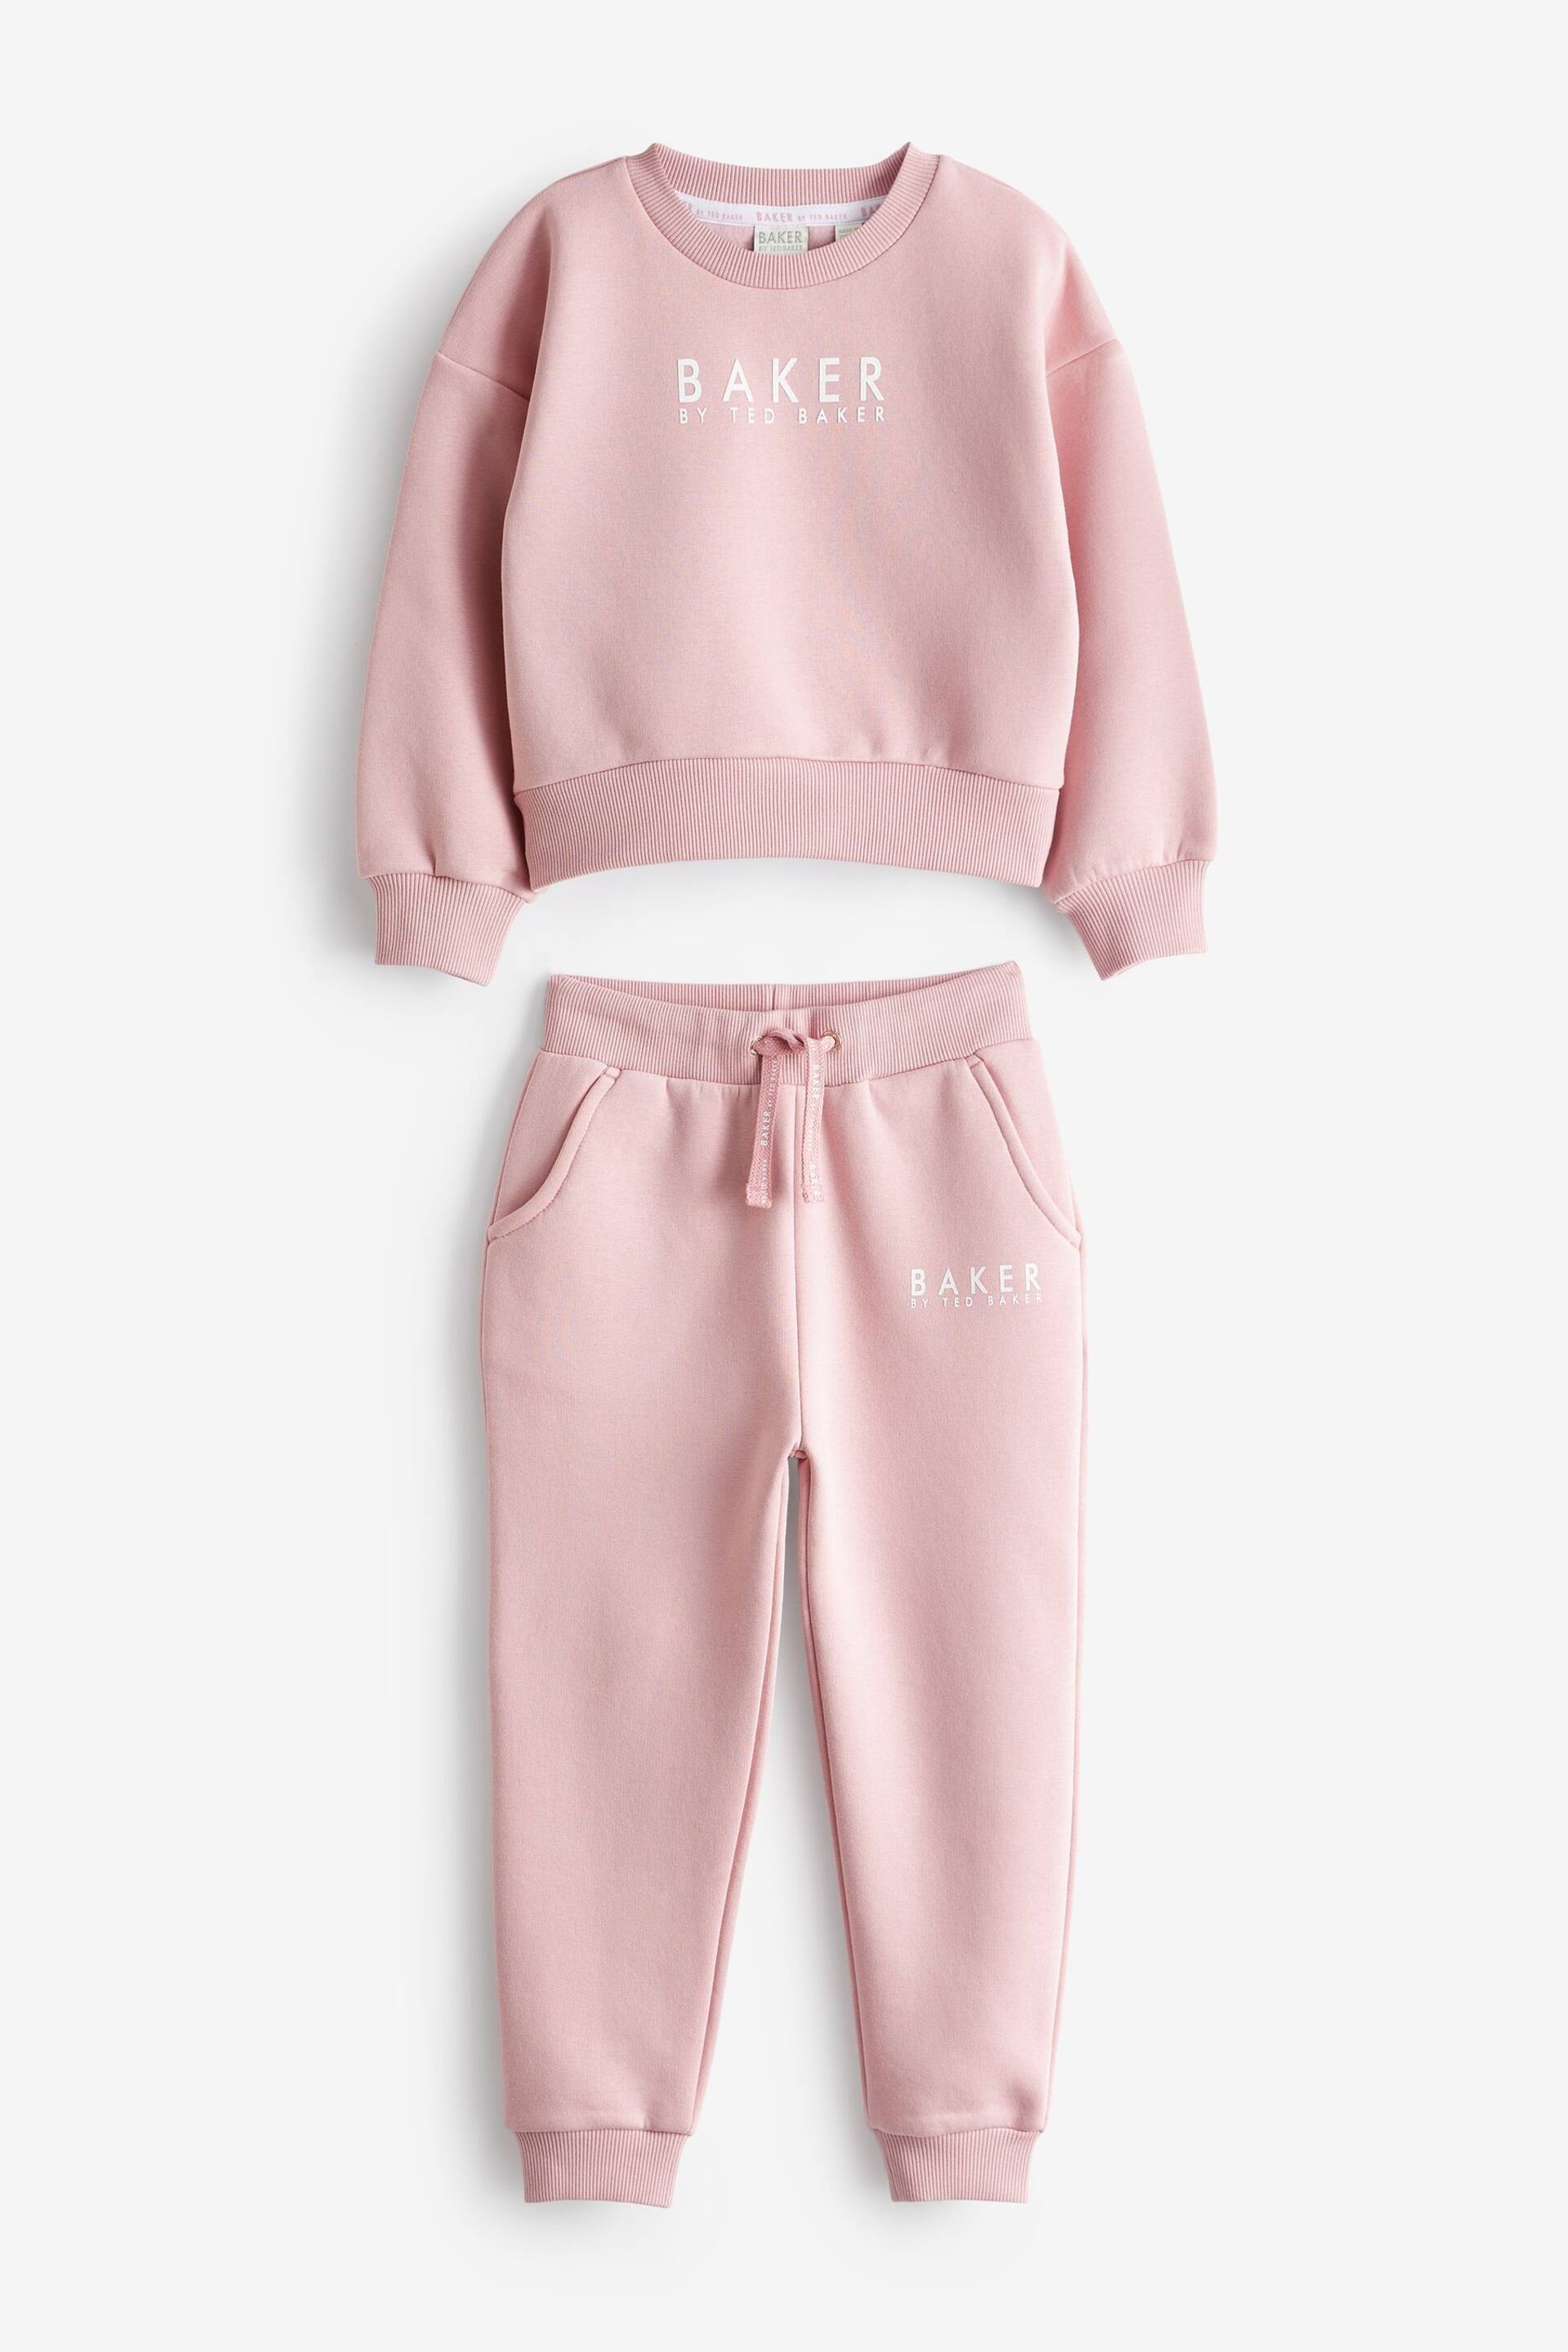 Baker by Ted Baker Varsity Sweater And Joggers Set - Image 7 of 10